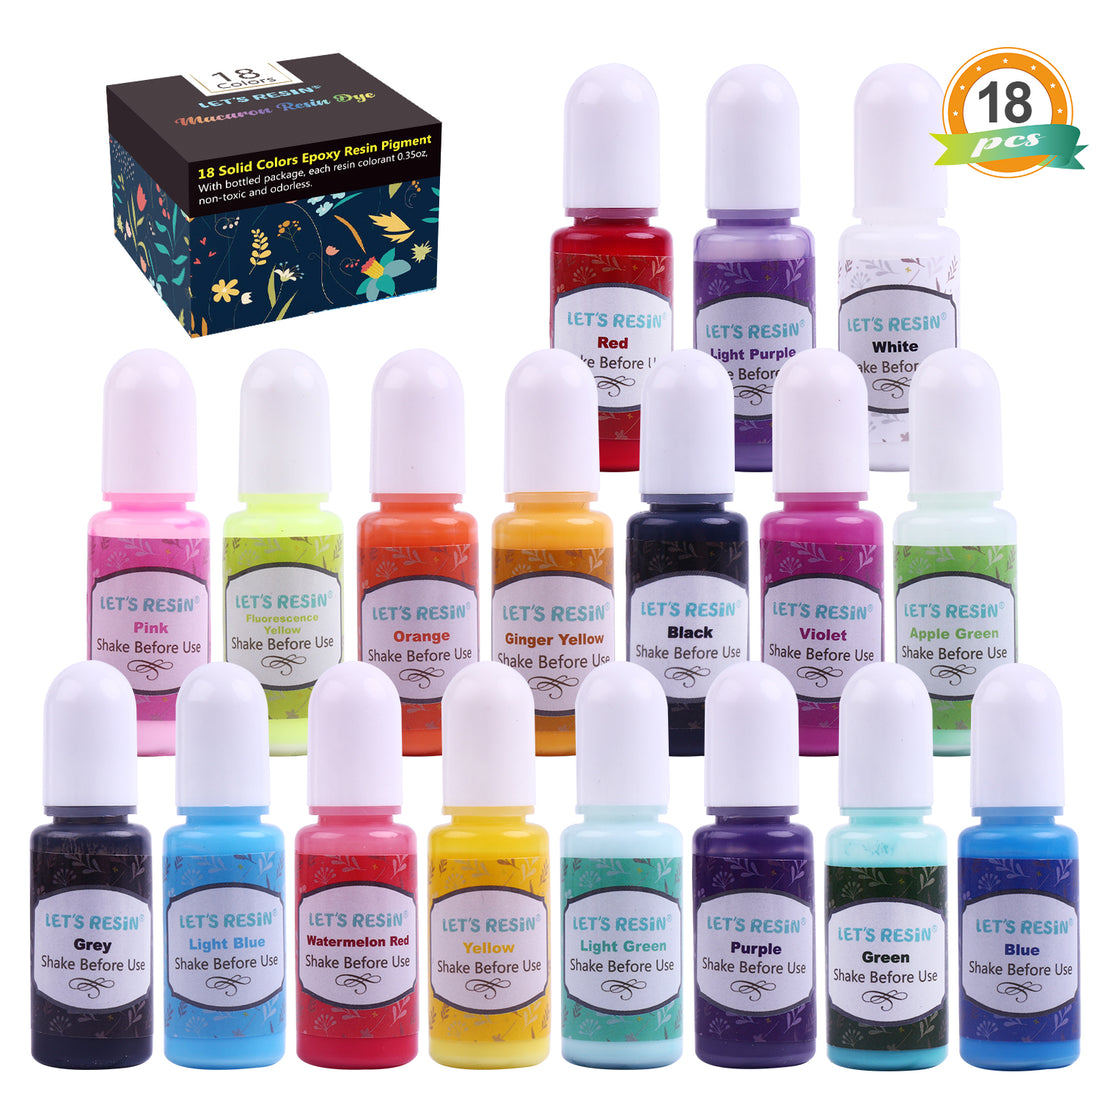 Neon Resin Tints - Pack Of 4 colors – ArtResin